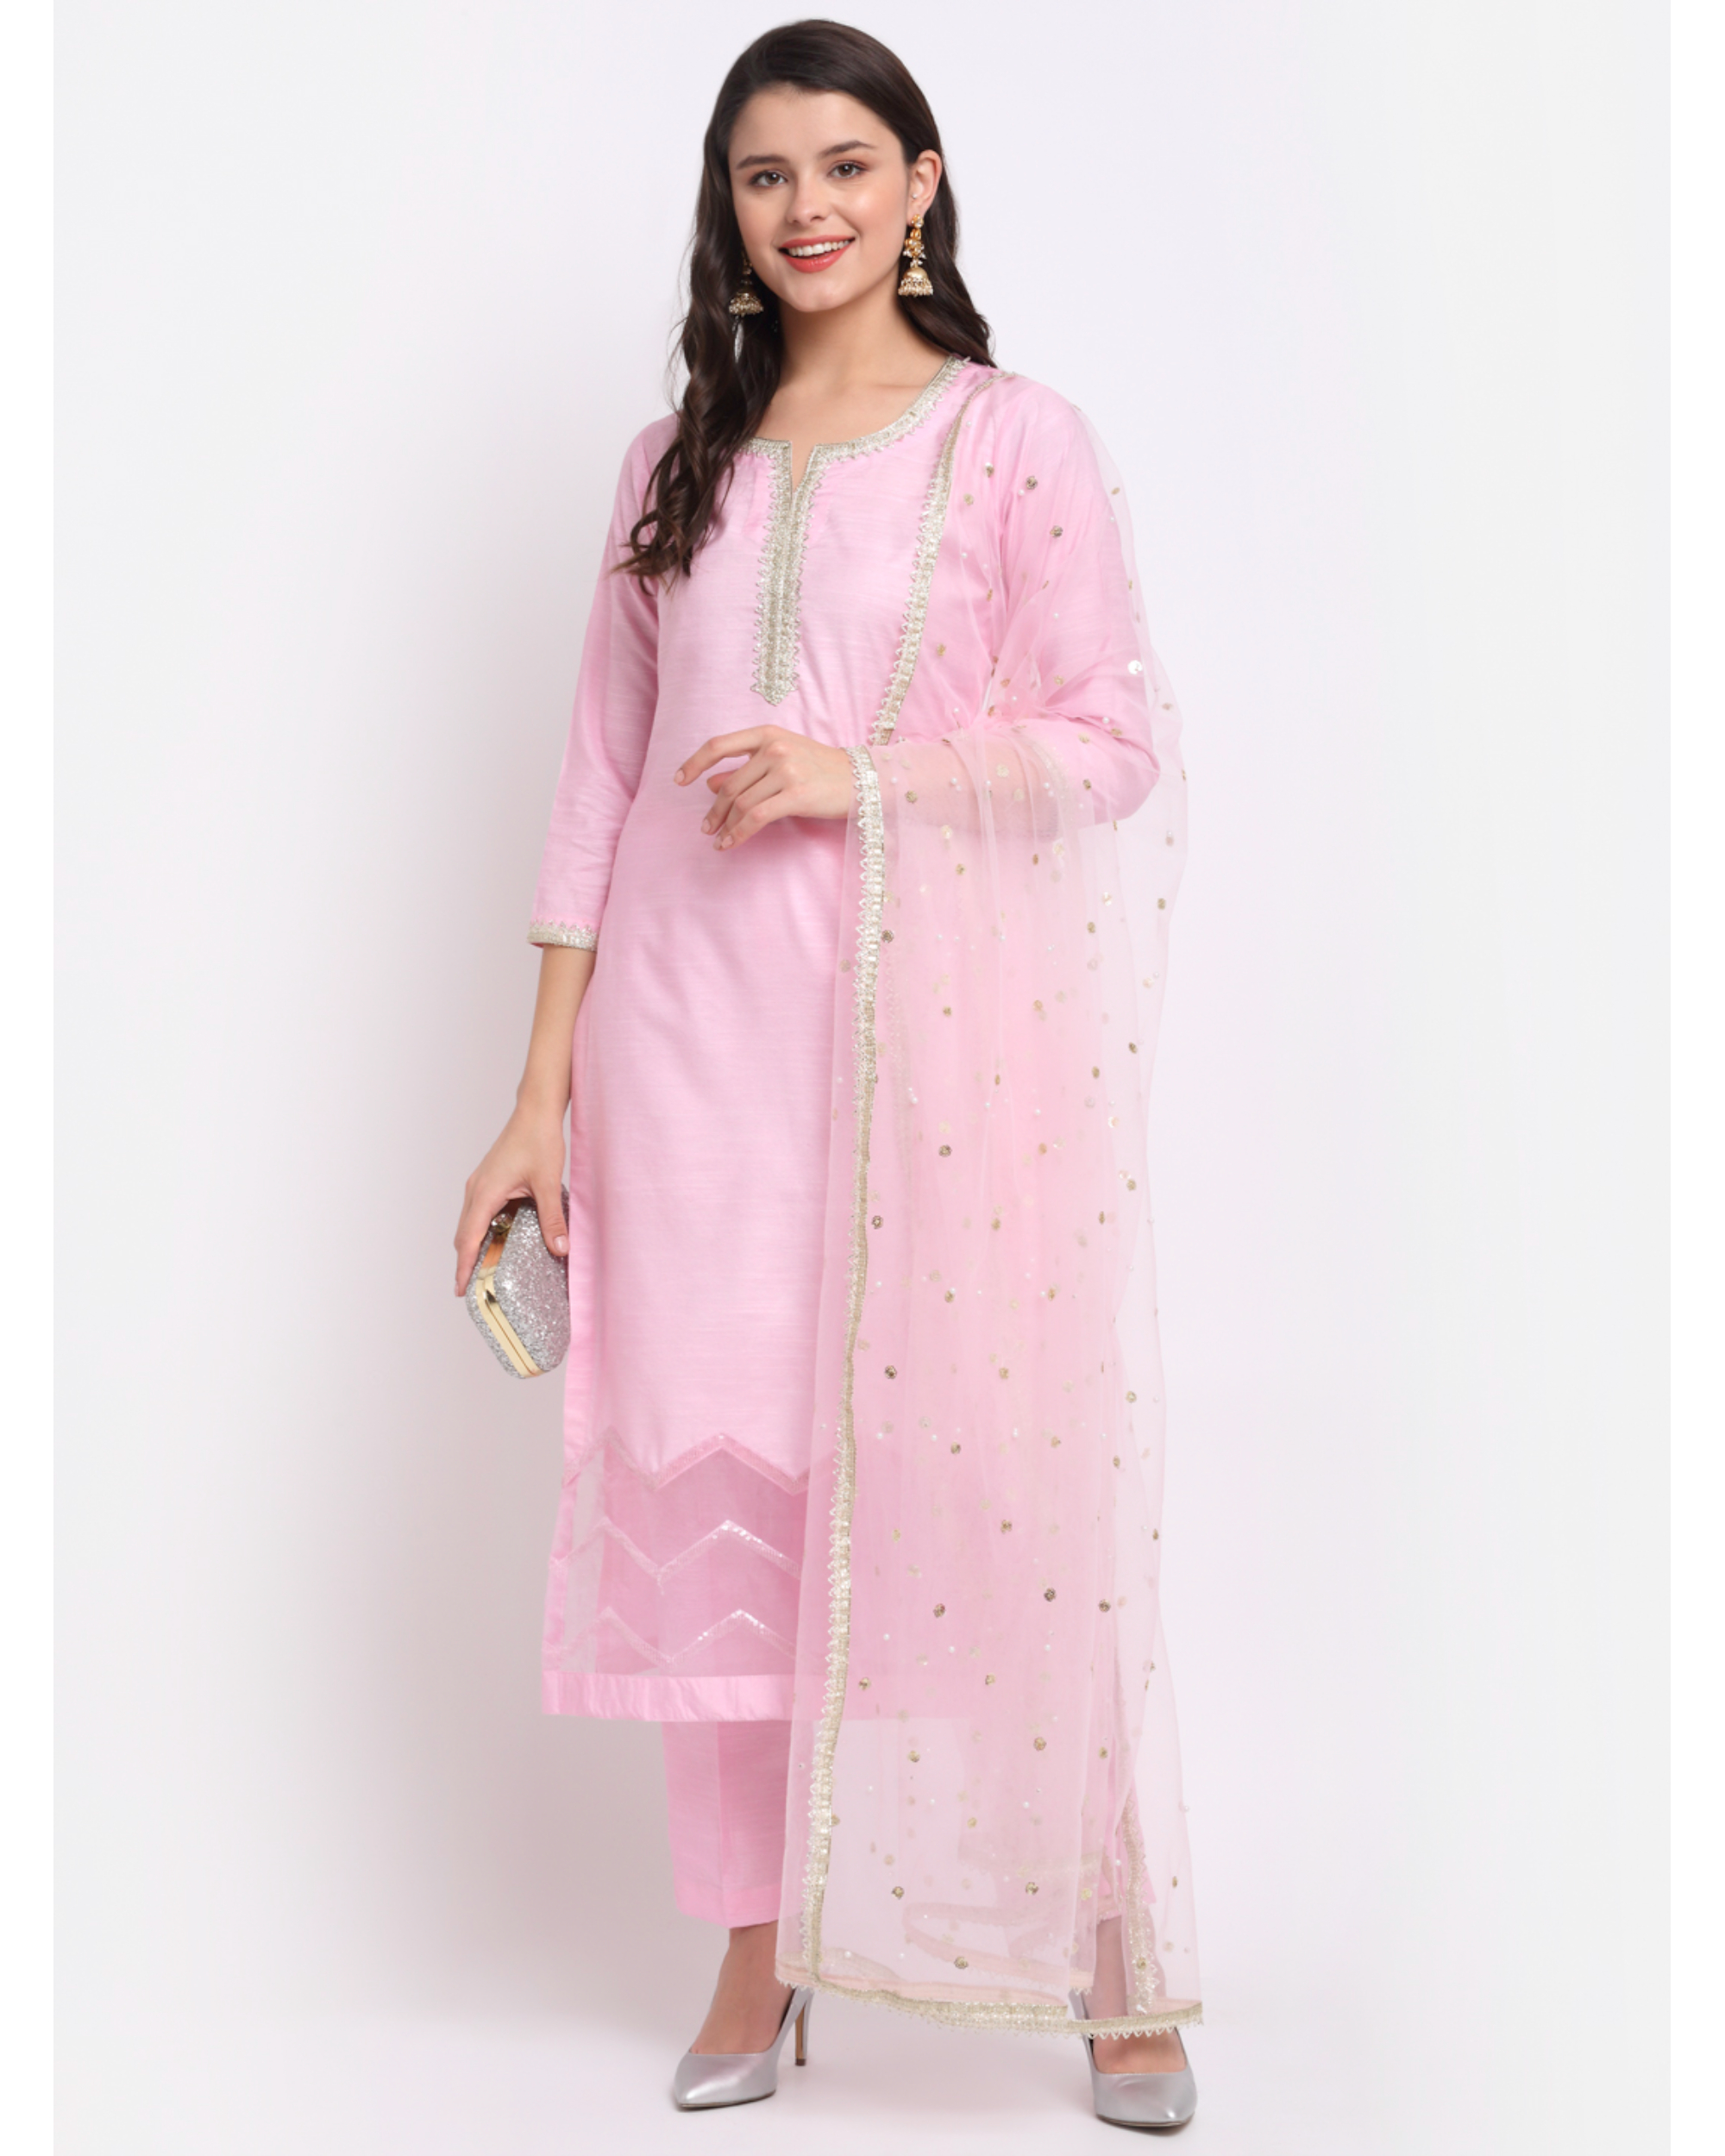 Cotton ALine Straight Kurta With Flared Sleeves  Pants With Shefali  Detailing